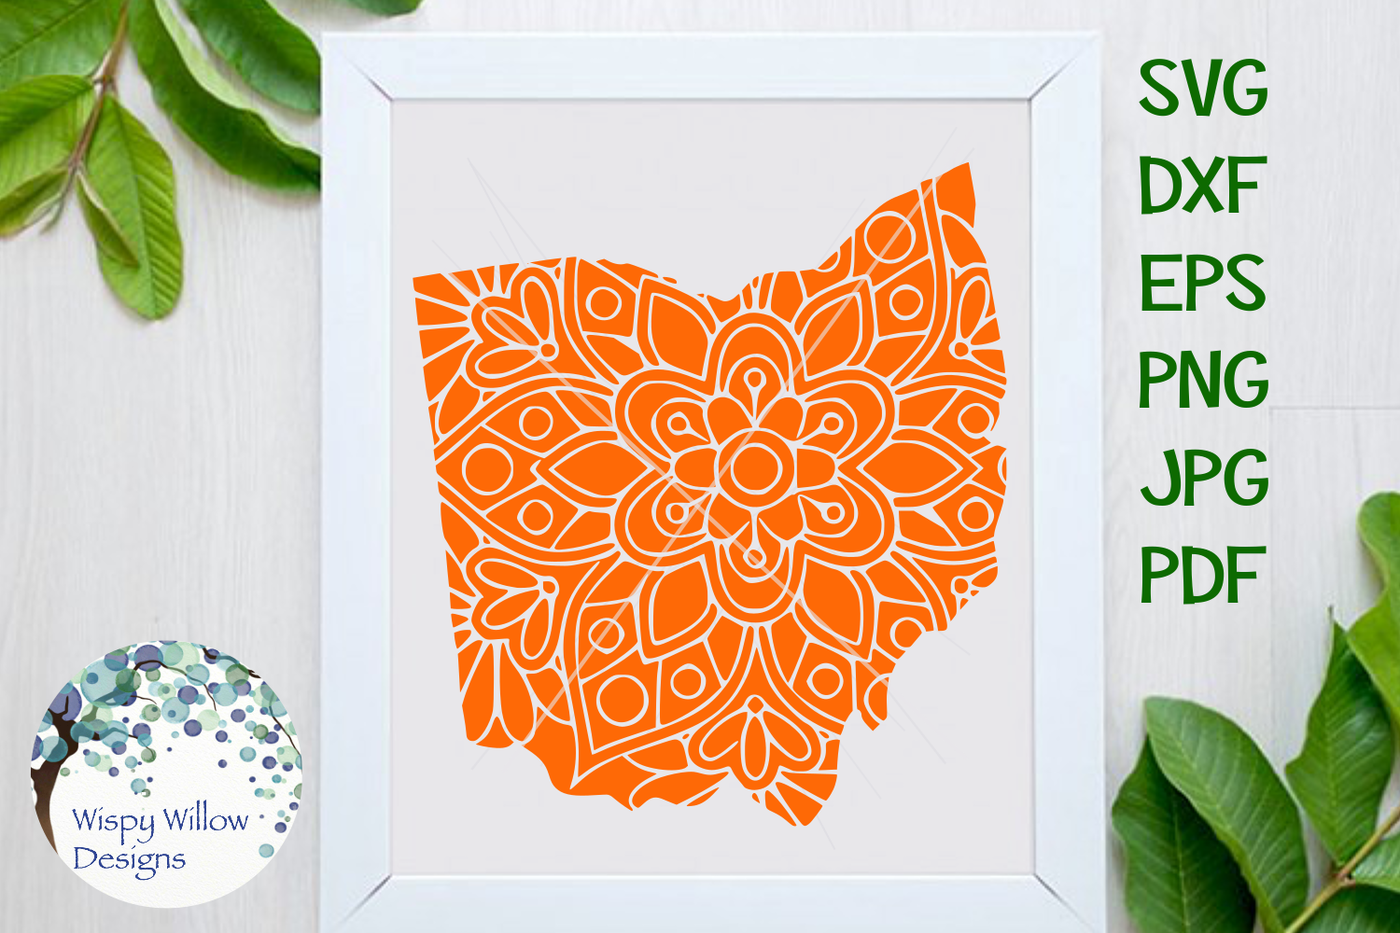 Download Ohio OH State Mandala SVG/DXF/EPS/PNG/JPG/PDF By Wispy Willow Designs | TheHungryJPEG.com